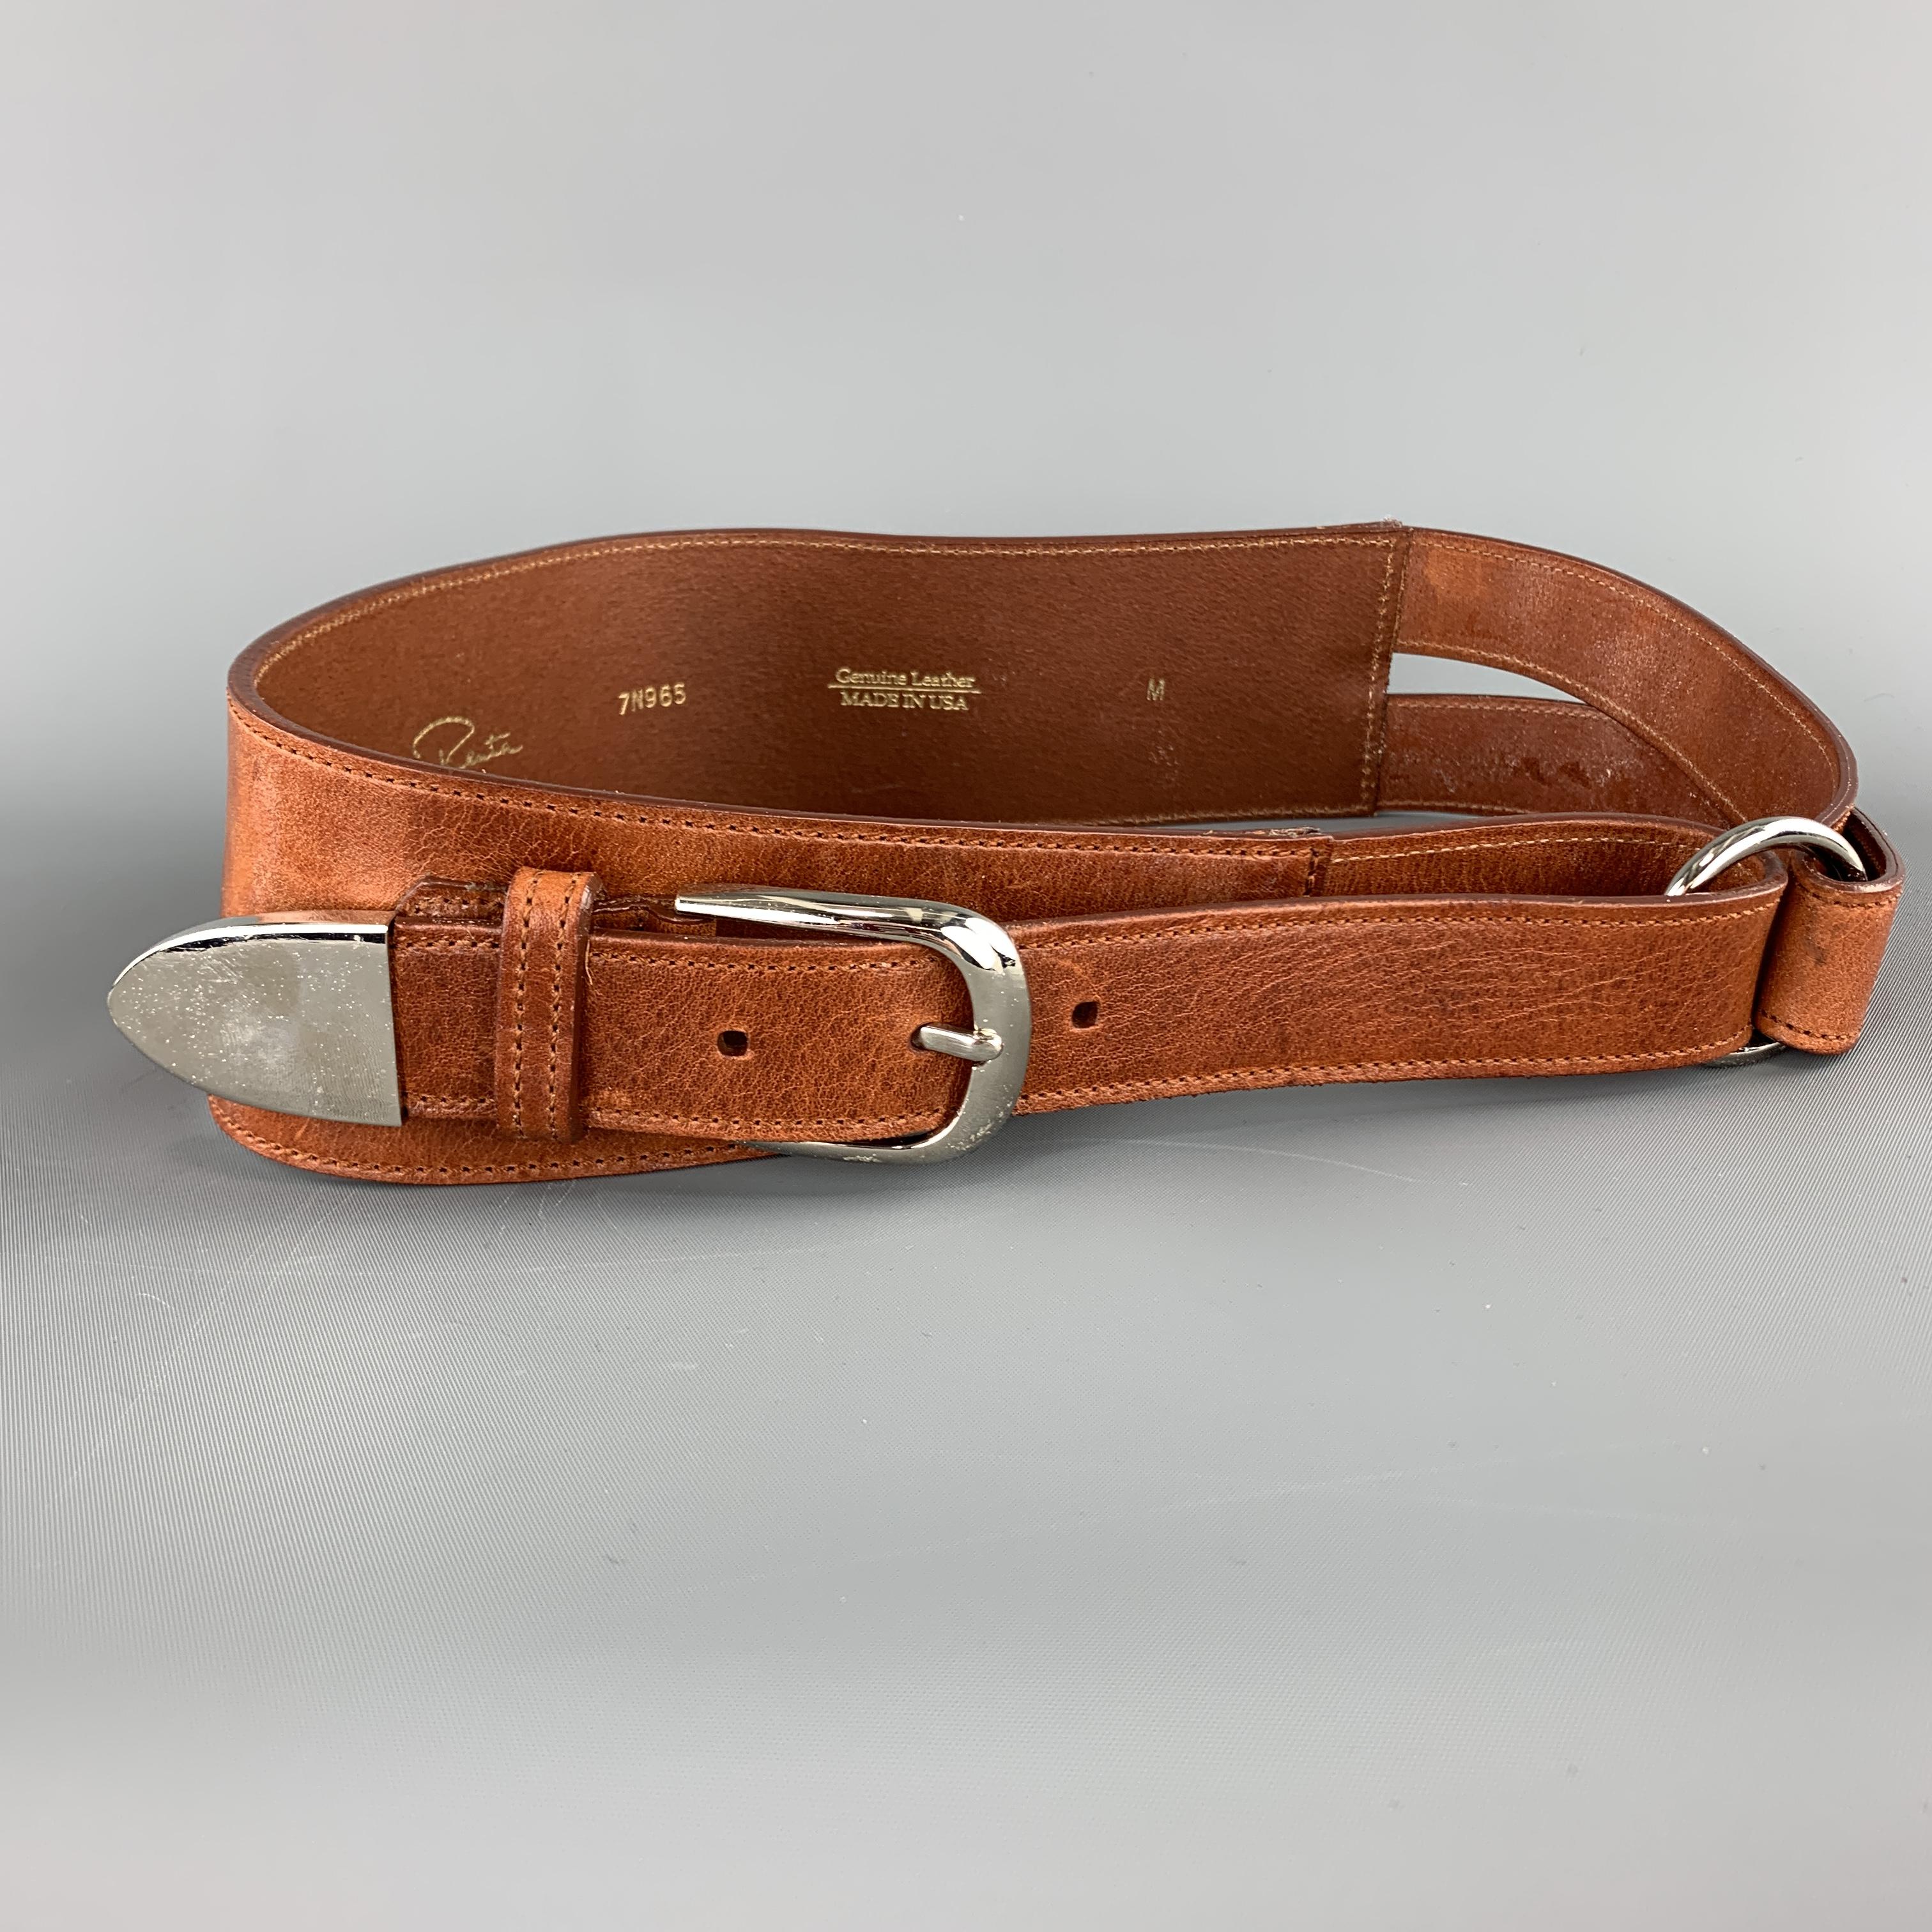 OSCAR DE LA RENTA belt comes in tan leather with a loop buckle wrap closure accented with silver tone hardware. Minor wear. Made in USA. 

Good Pre-Owned Condition.
Marked: M

Width: 3 in.
Minimum Fit: 30 in.
Maximum Fit: 32 in. 